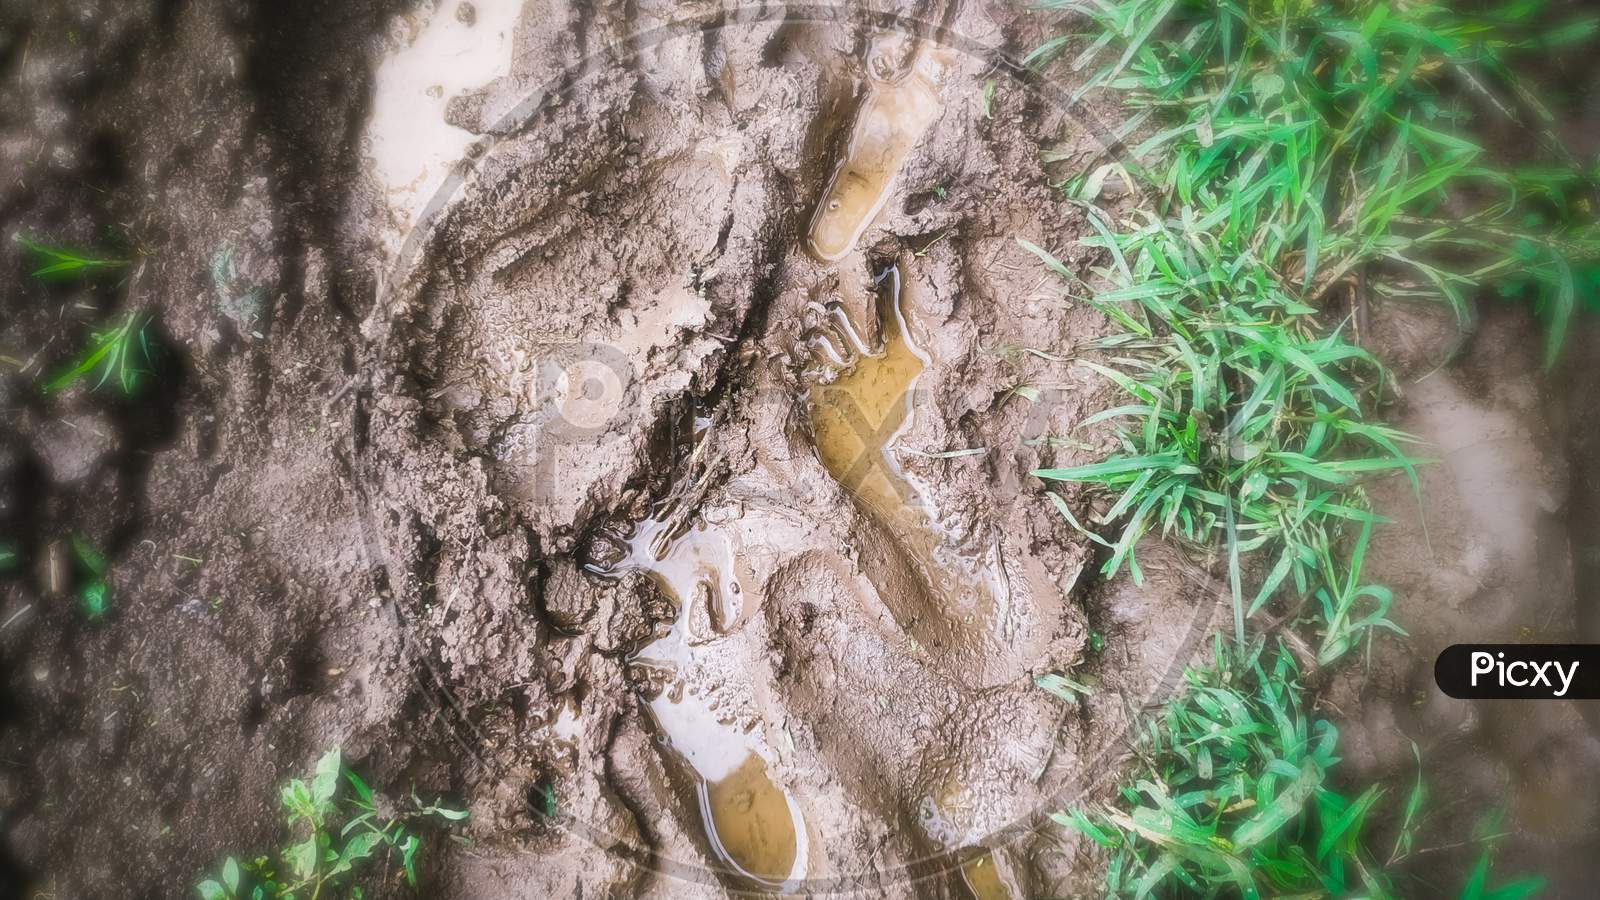 Rain water accumulated in foot imprint of dirty mud in the grass meadow. Very enjoying and relaxing with muddy nature in rainy season